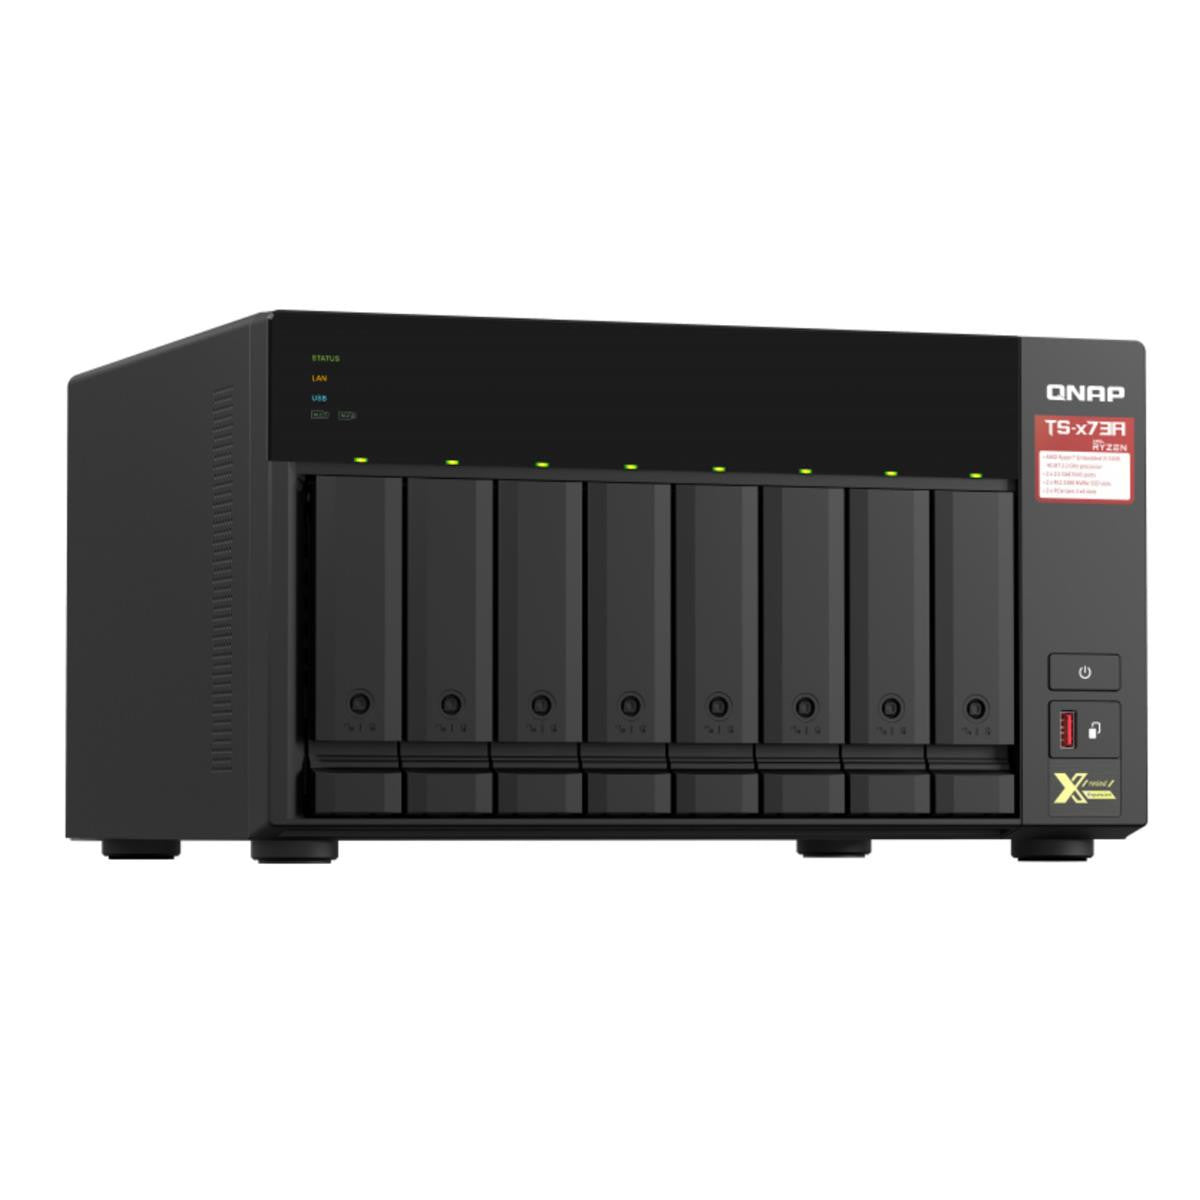 QNAP TS-873A 8-BAY NAS with 8GB DDR4 RAM and 48TB (8x6TB) Seagate Ironwolf NAS Drives Fully Assembled and Tested